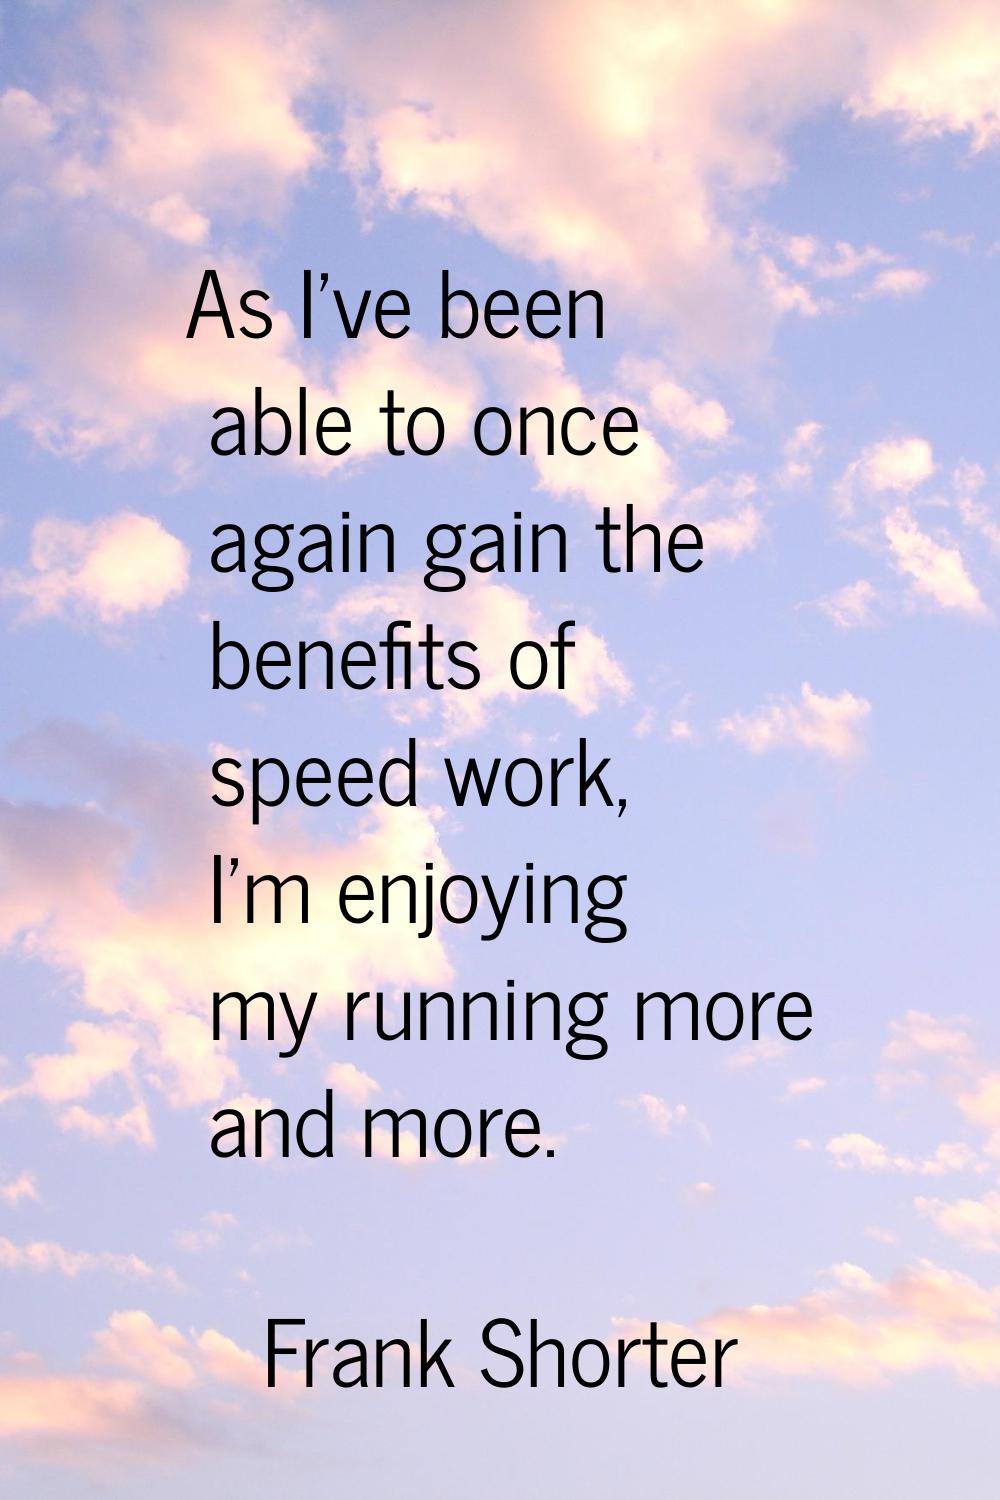 As I've been able to once again gain the benefits of speed work, I'm enjoying my running more and m